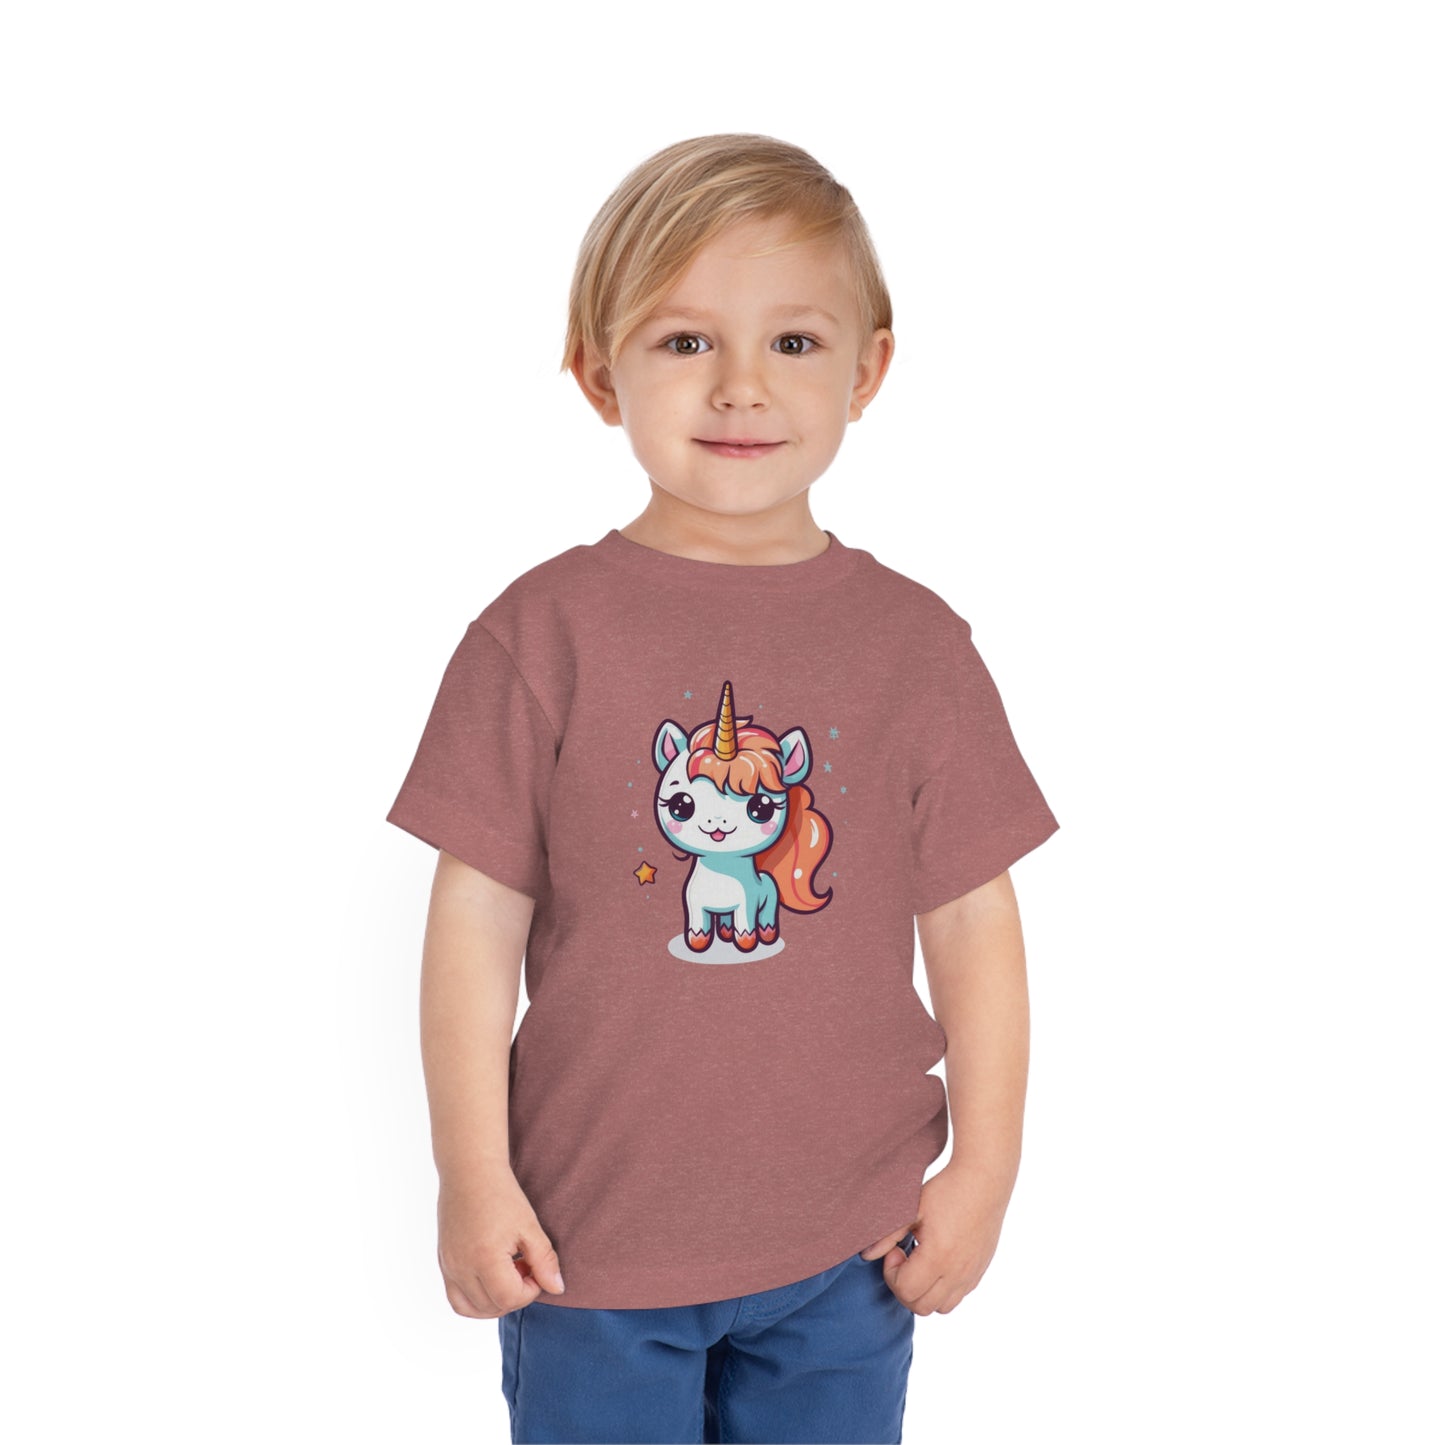 Mock up of a child wearing the Heather Mauve t-shirt